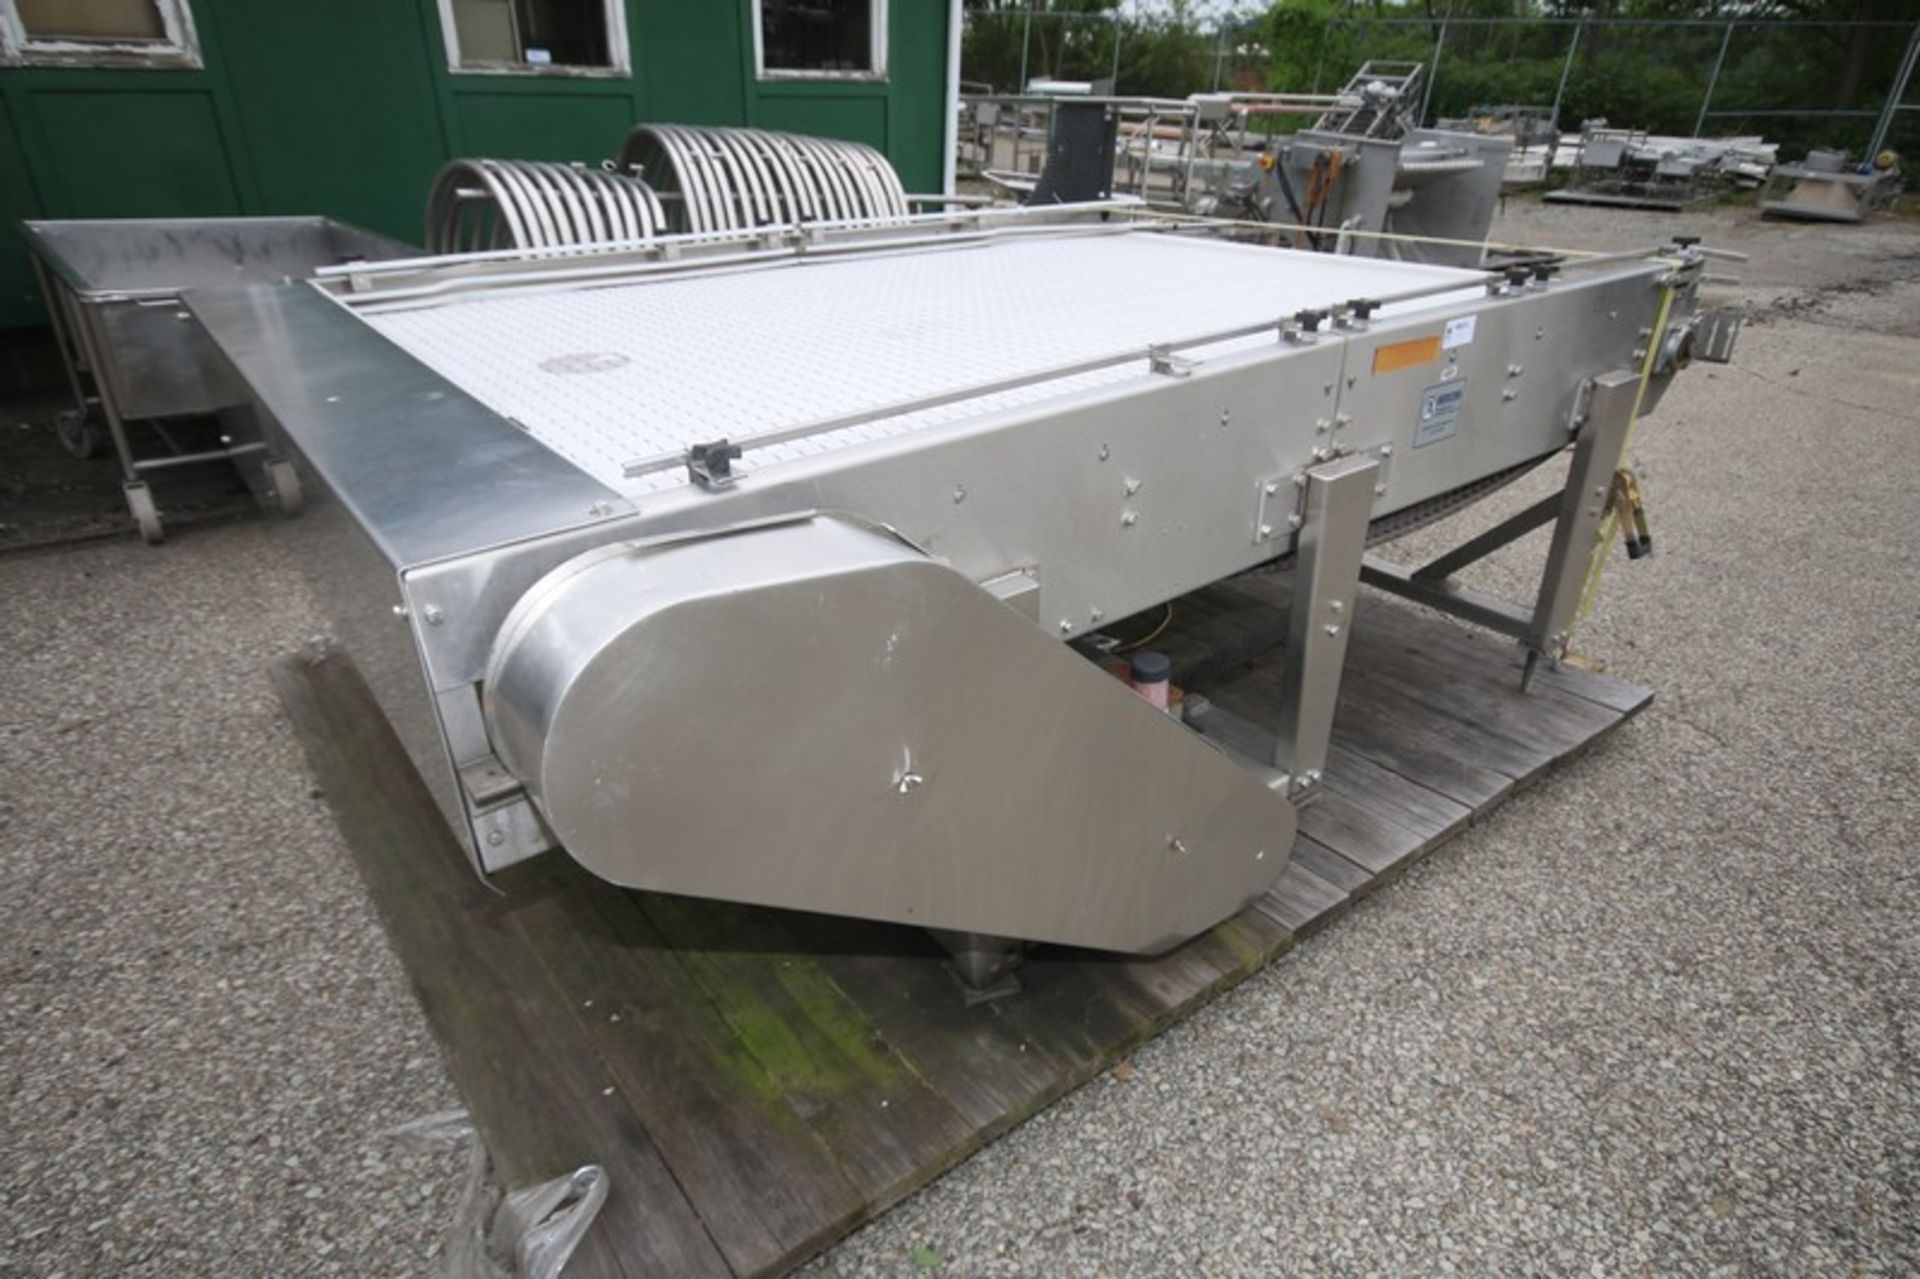 Nercon Aprox. 10' L x 6' W x 40" H S/S Conveyor Accumulation Table, with Rex Type Plastic Belt, with - Image 4 of 7